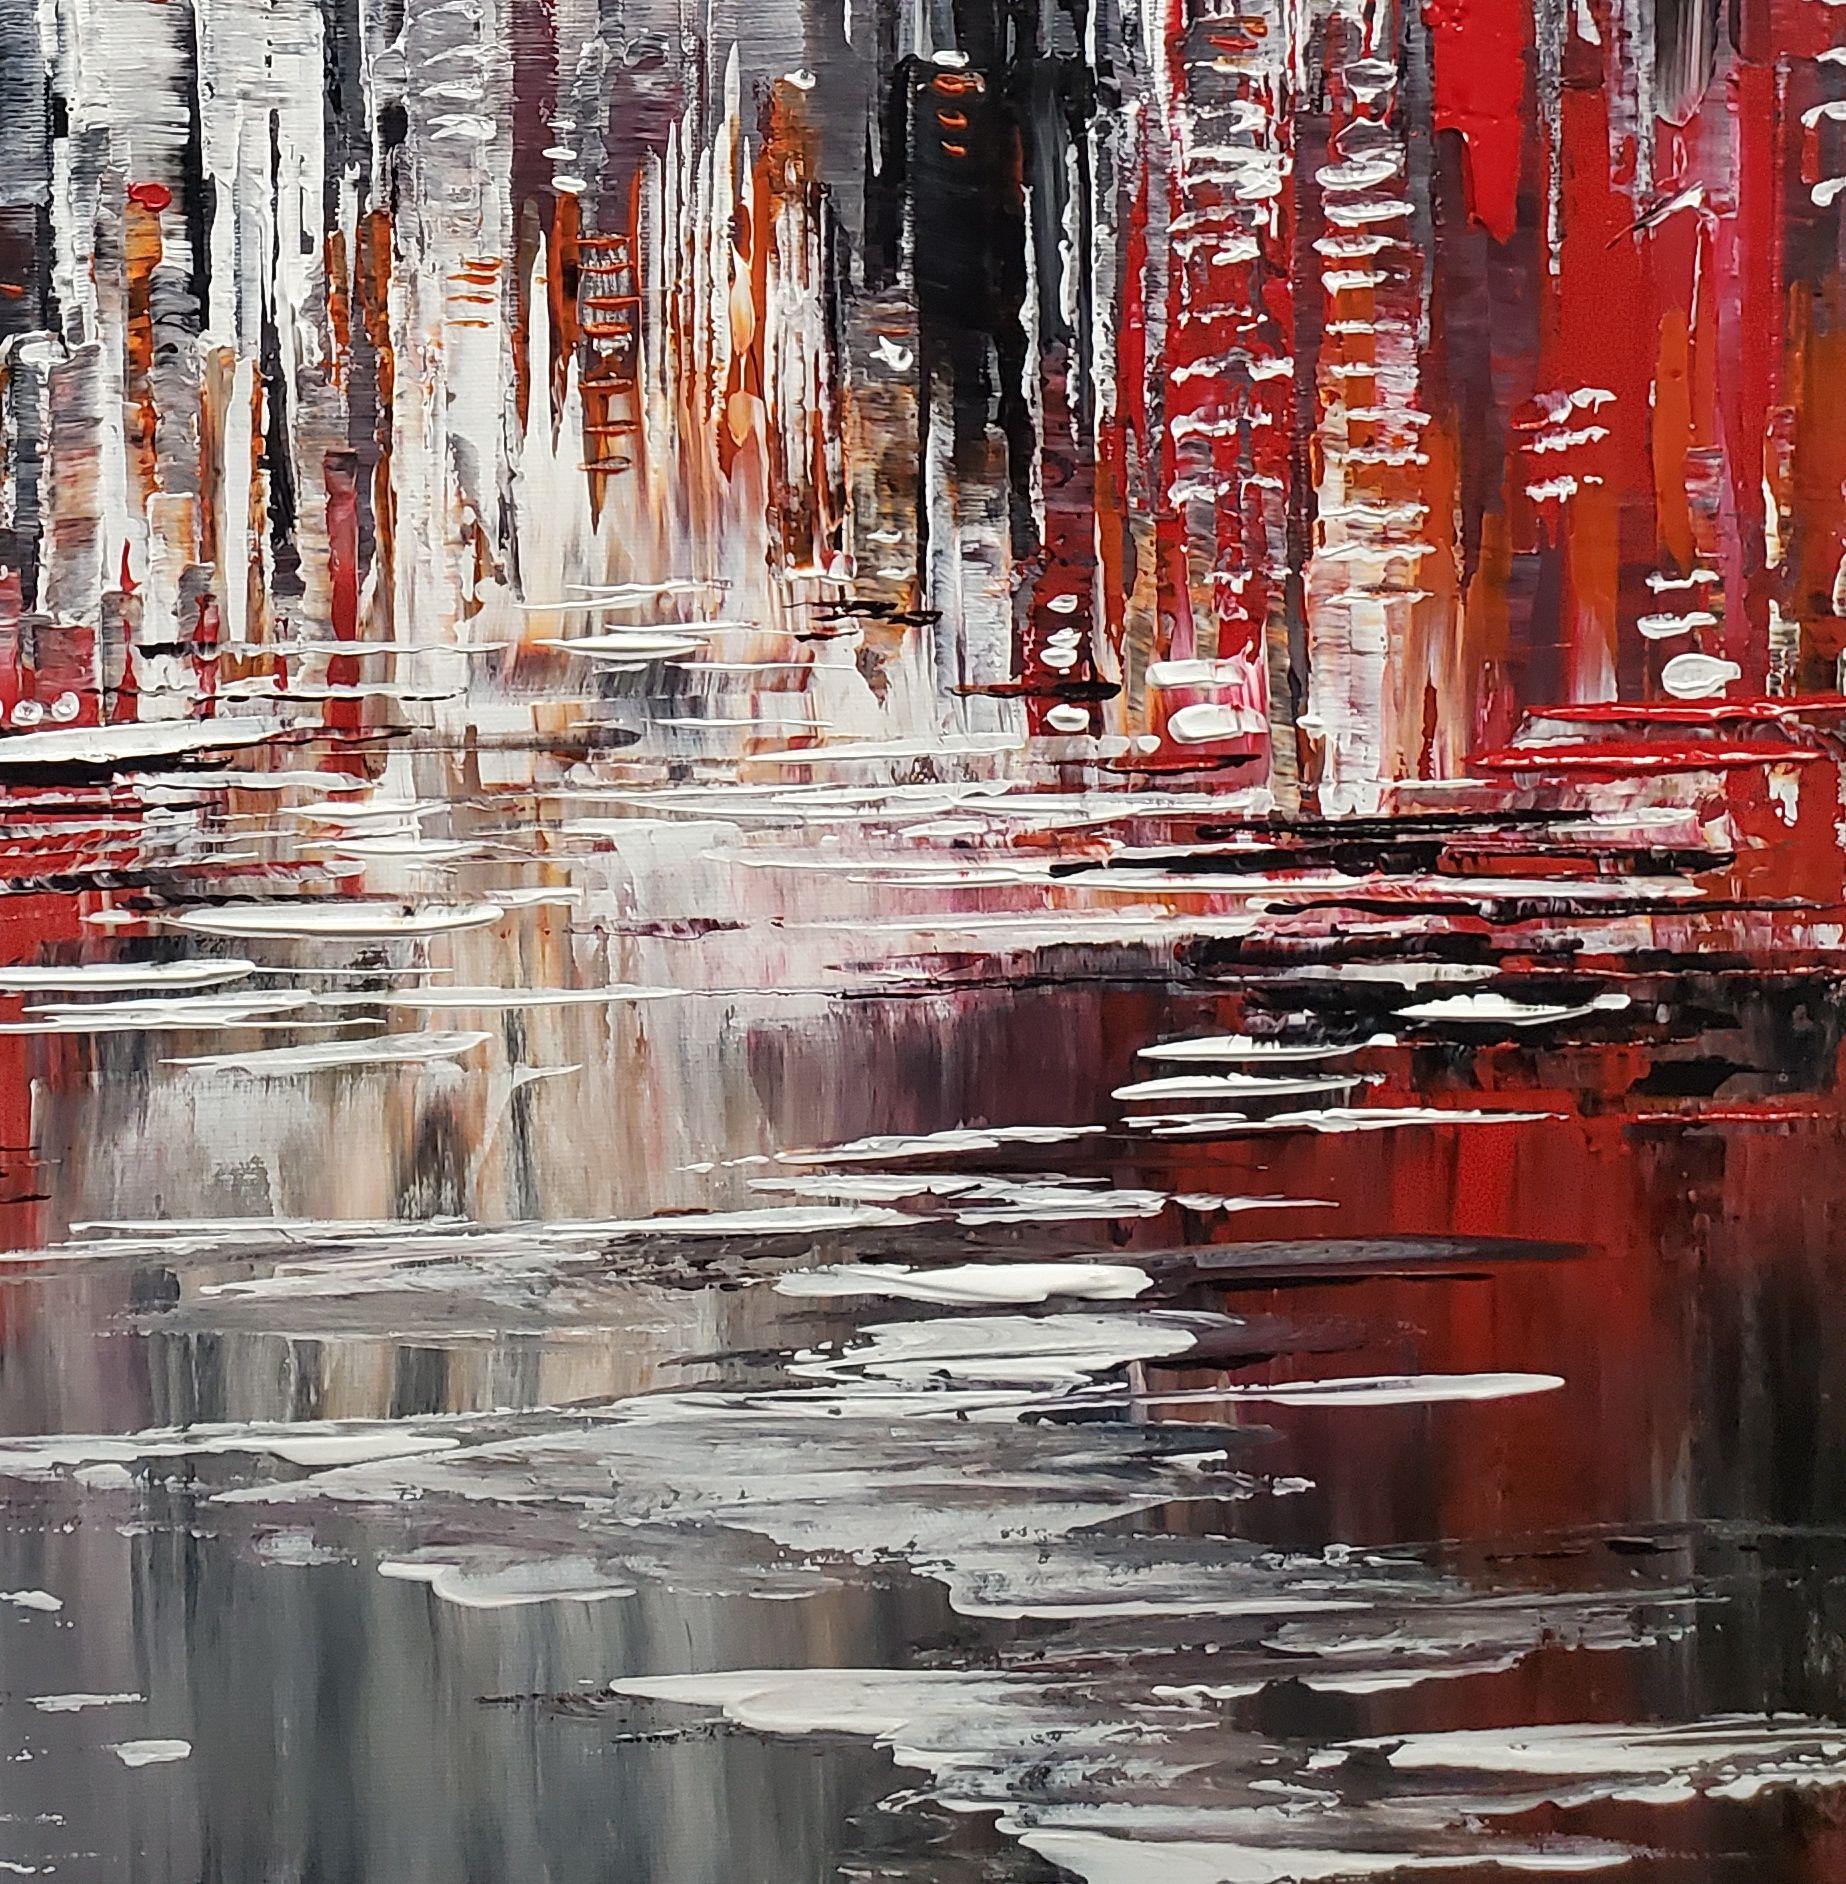 This is an original palette knife urban landscape painting. Size: 20